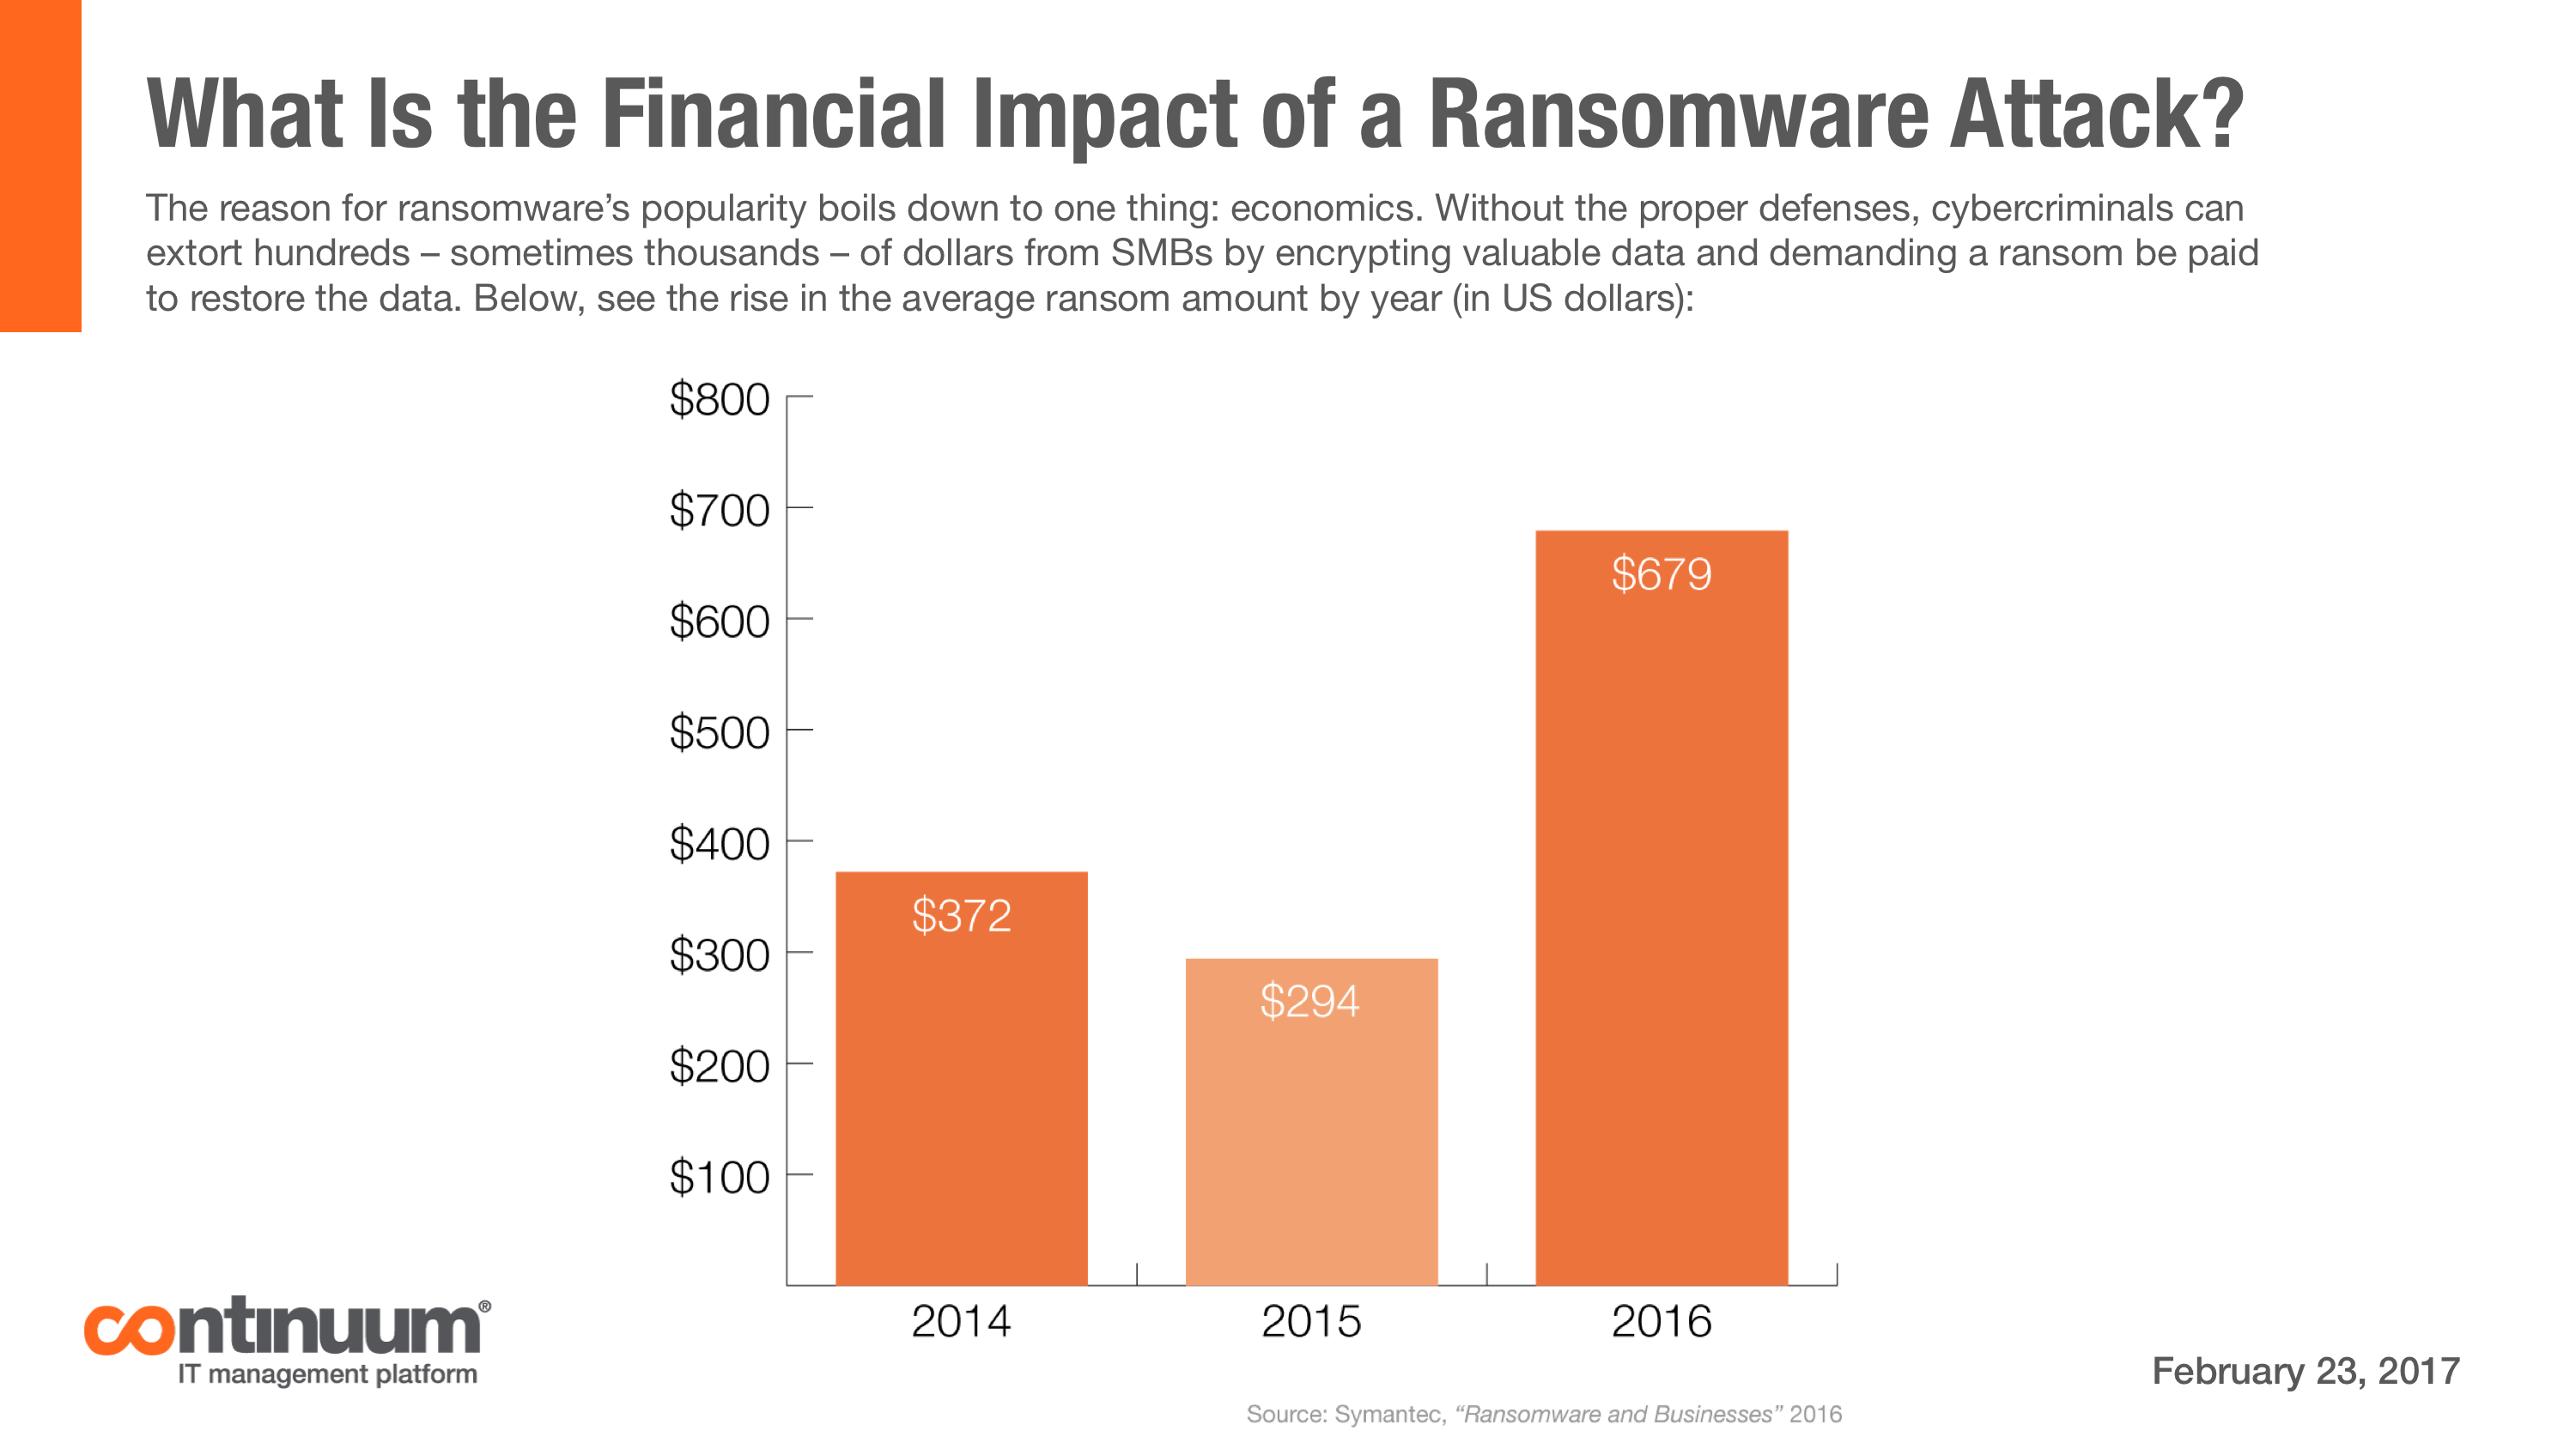 What Is the Financial Impact of a Ransomware Attack?